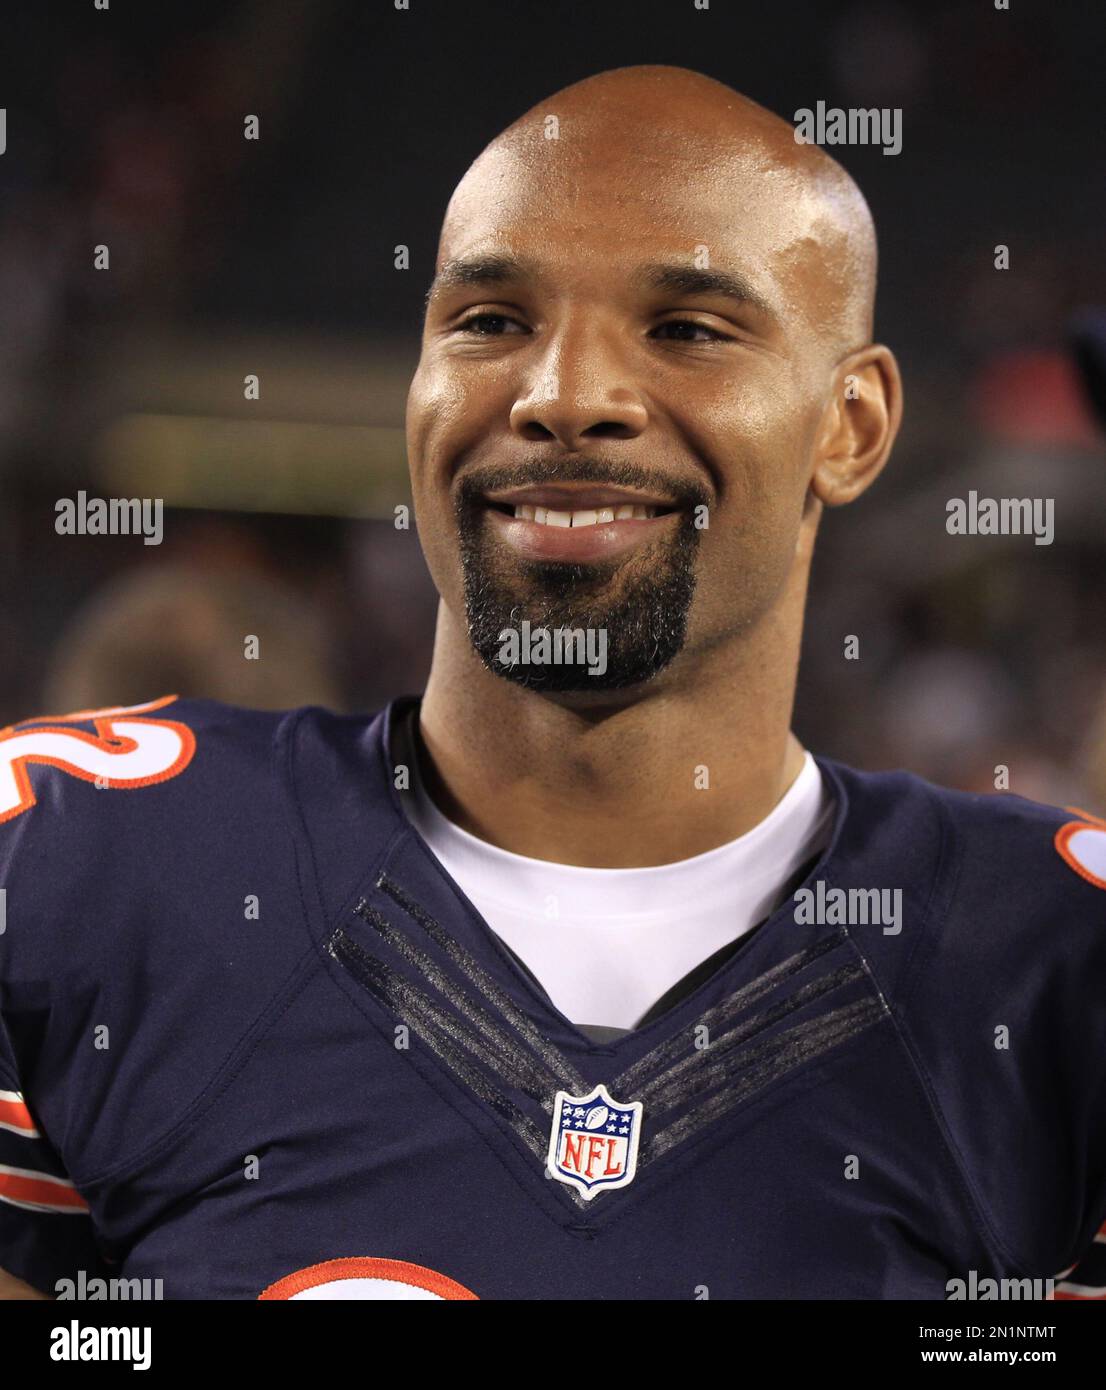 Chicago Bears running back Matt Forte (22) smiles after a preseason NFL football game against the Miami Dolphins Thursday, Aug. 13, 2015, in Chicago. (AP Photo/Christian K. Lee) Stock Photo